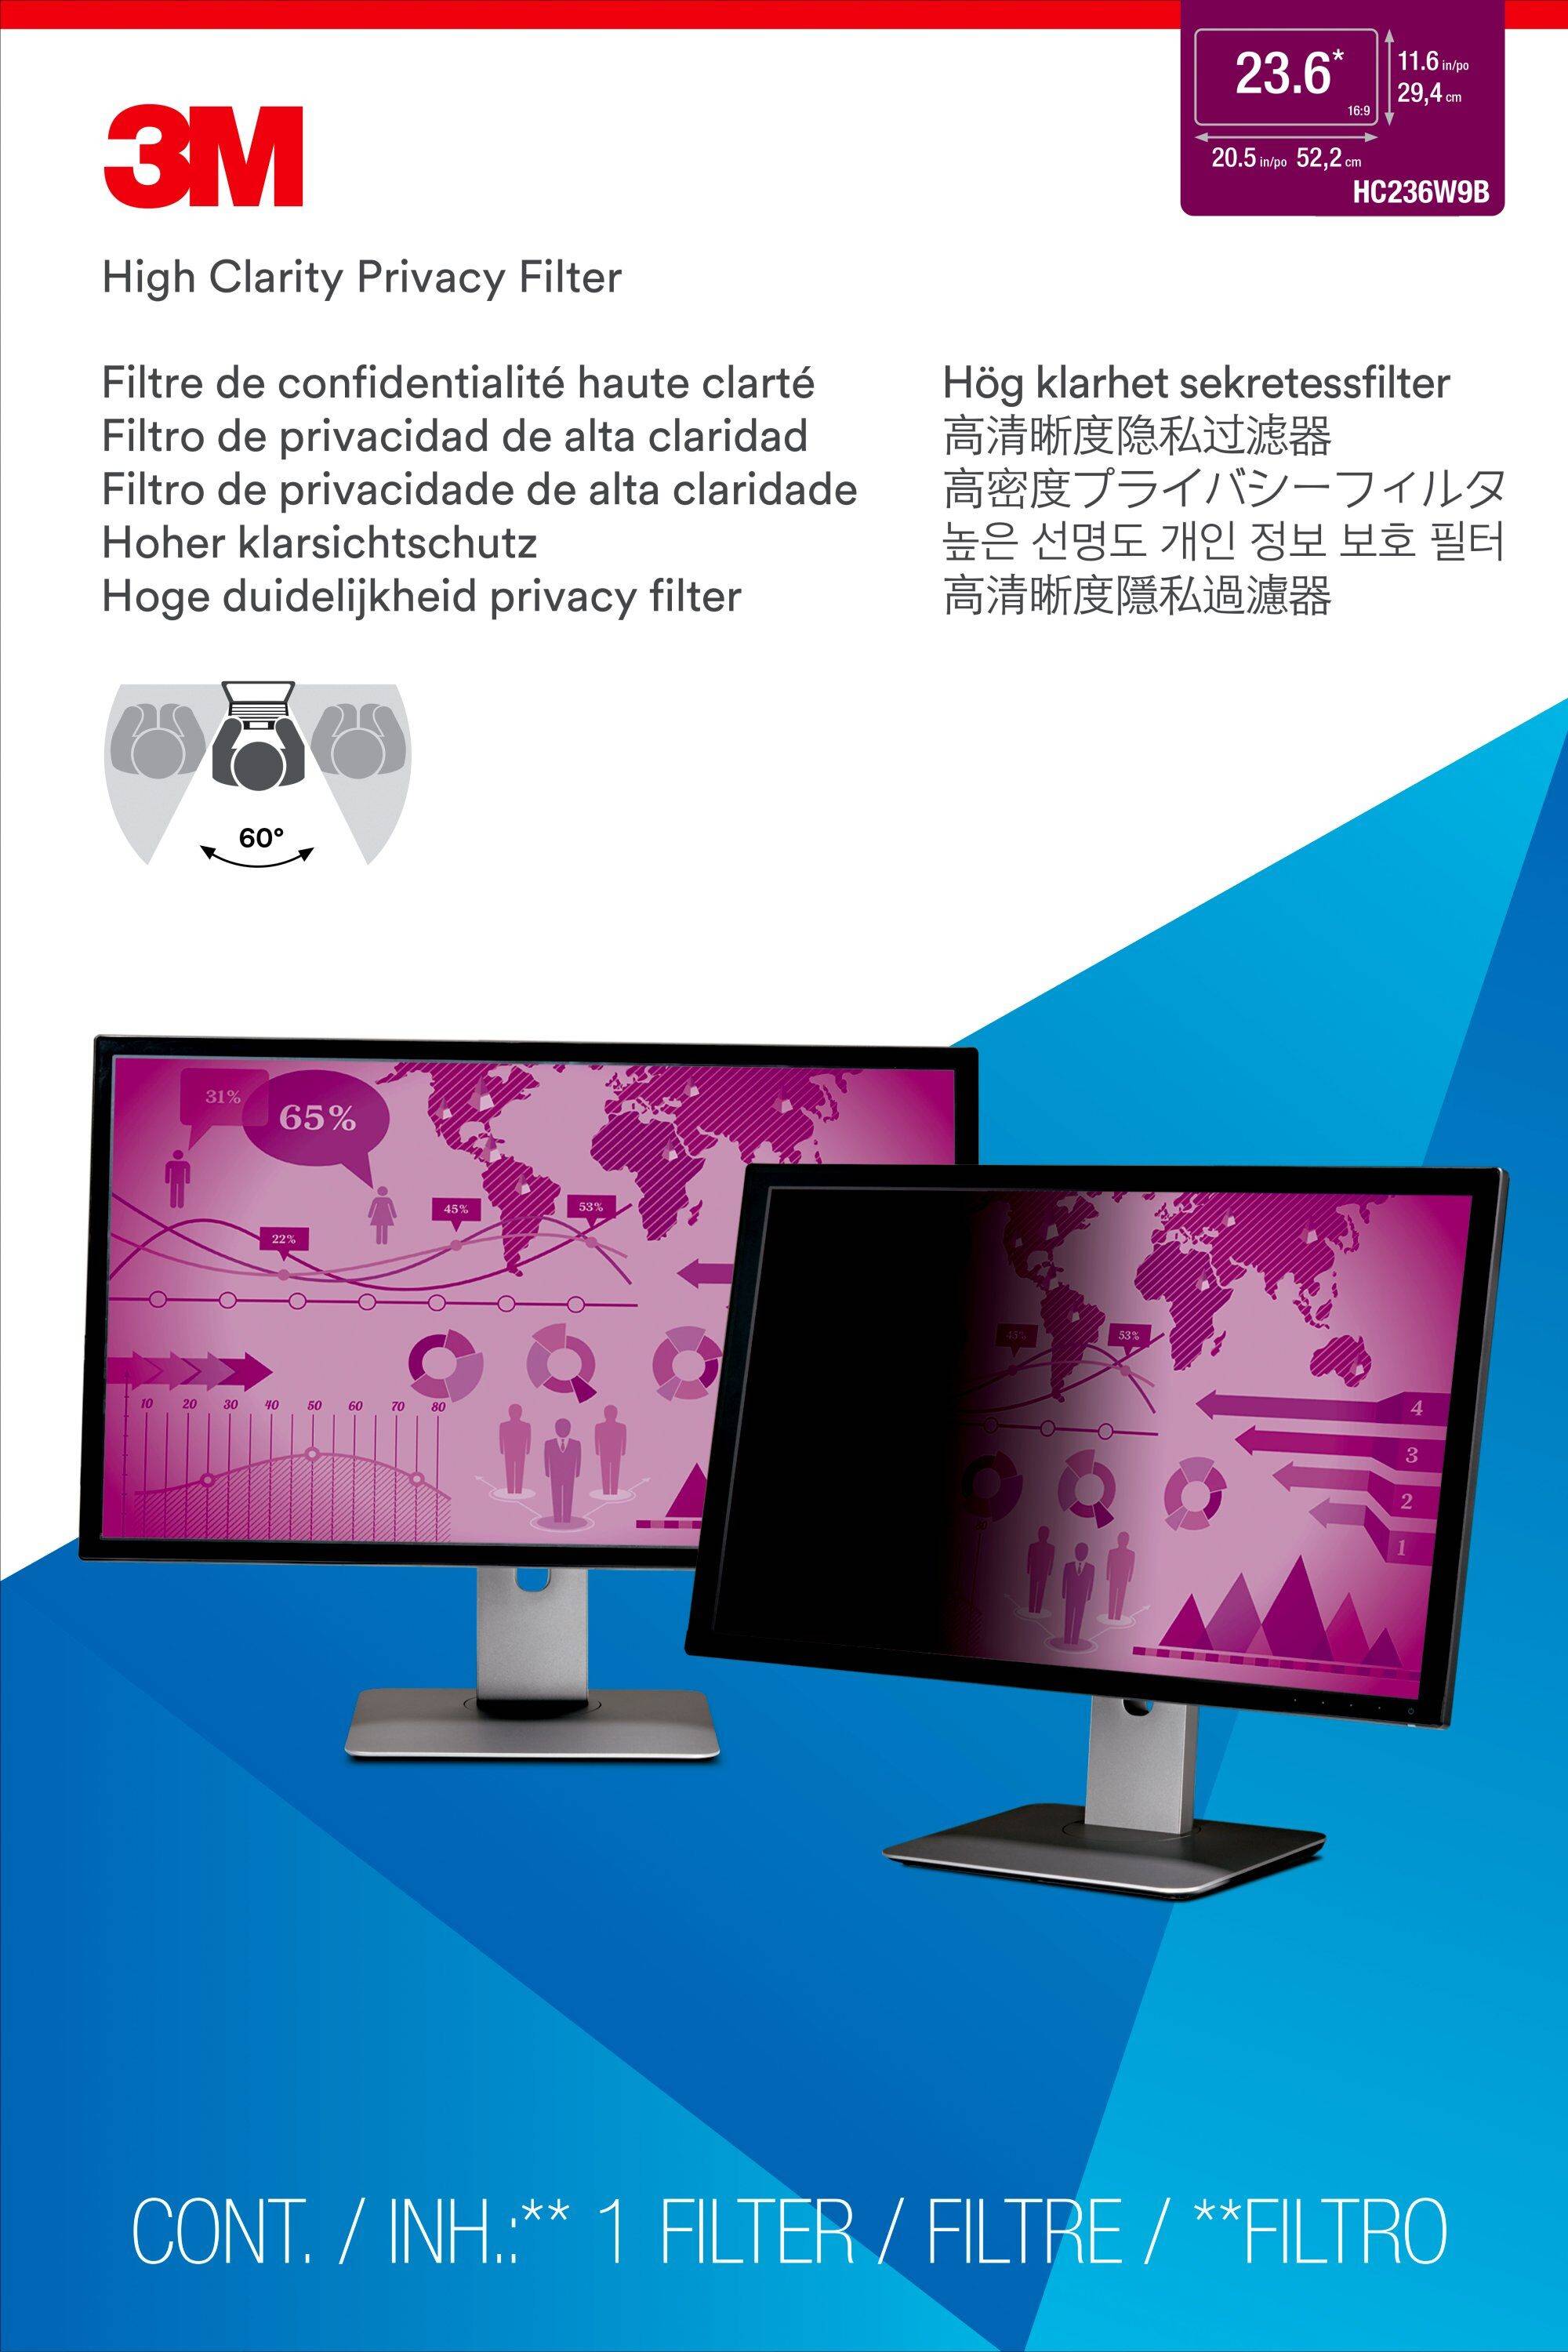 Rca Informatique - image du produit : PRIVACY FILTER FOR 23.6IN STATIONARY COMPUTER